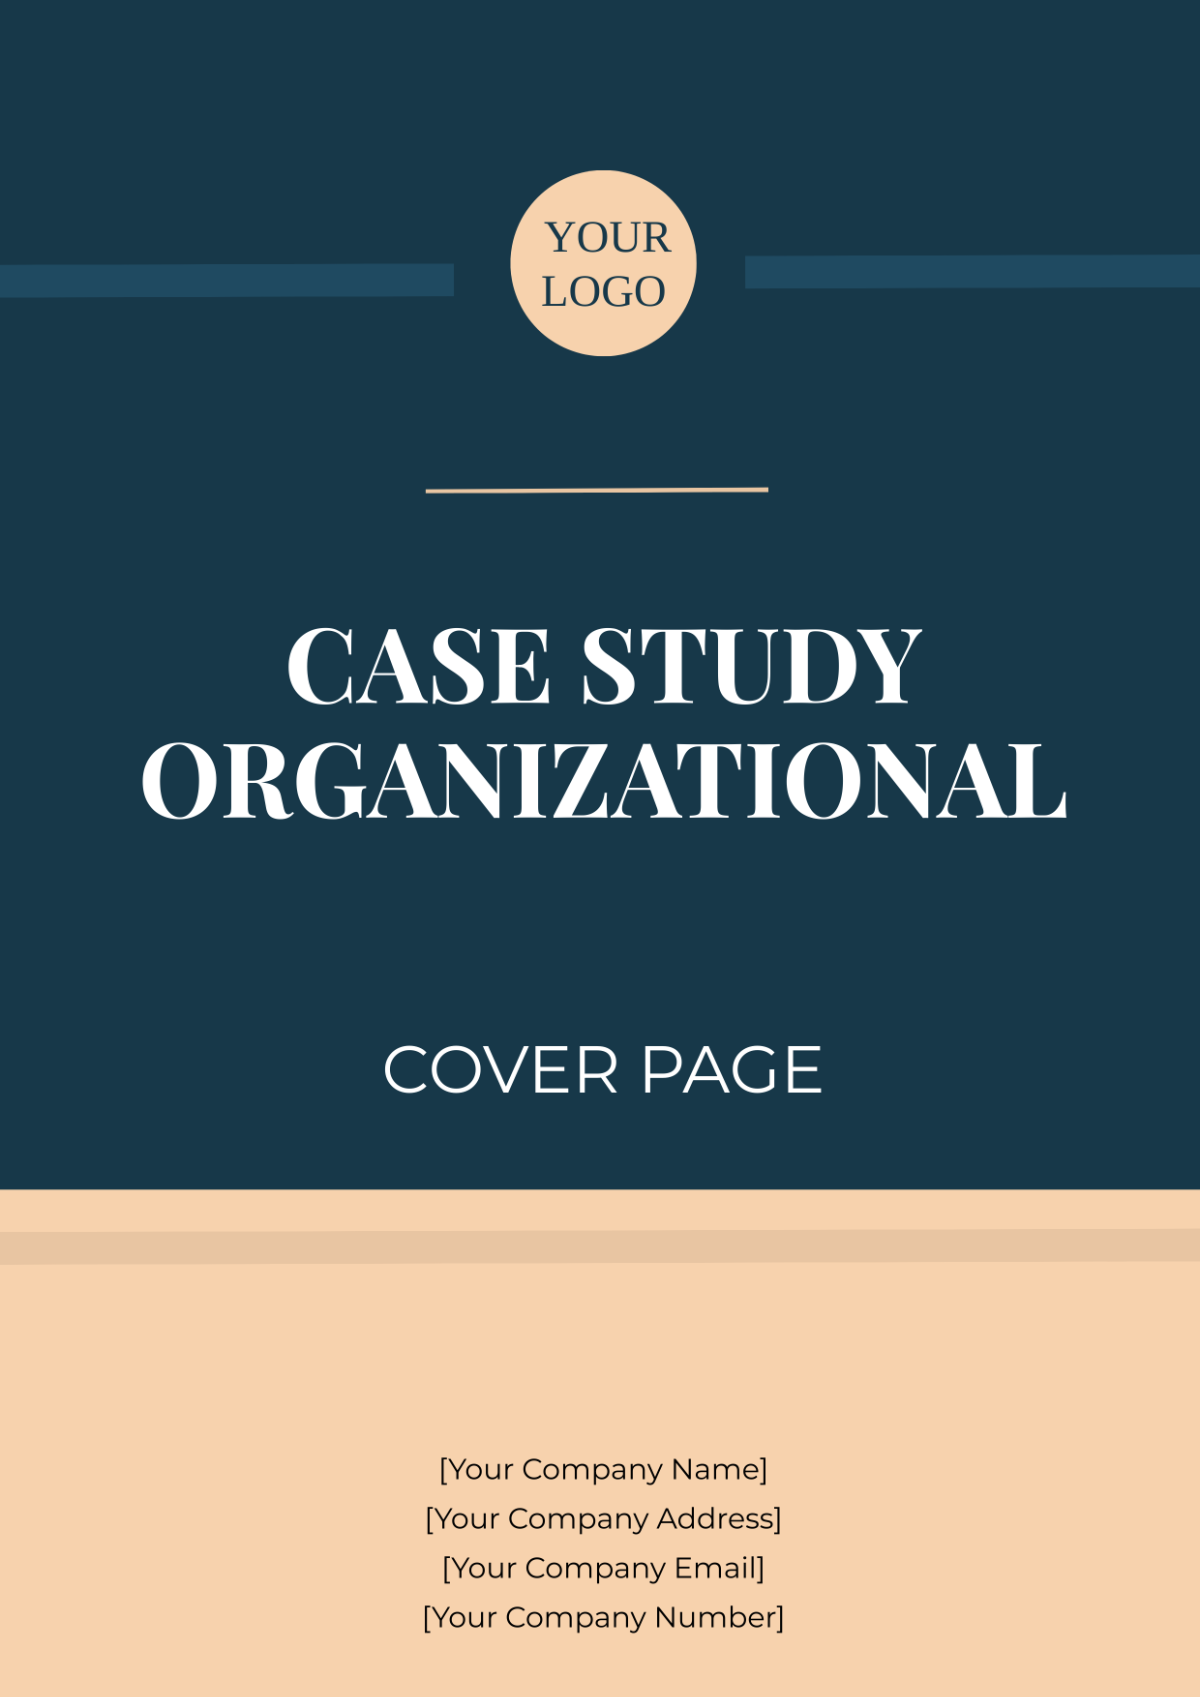 Case Study Organizational Cover Page